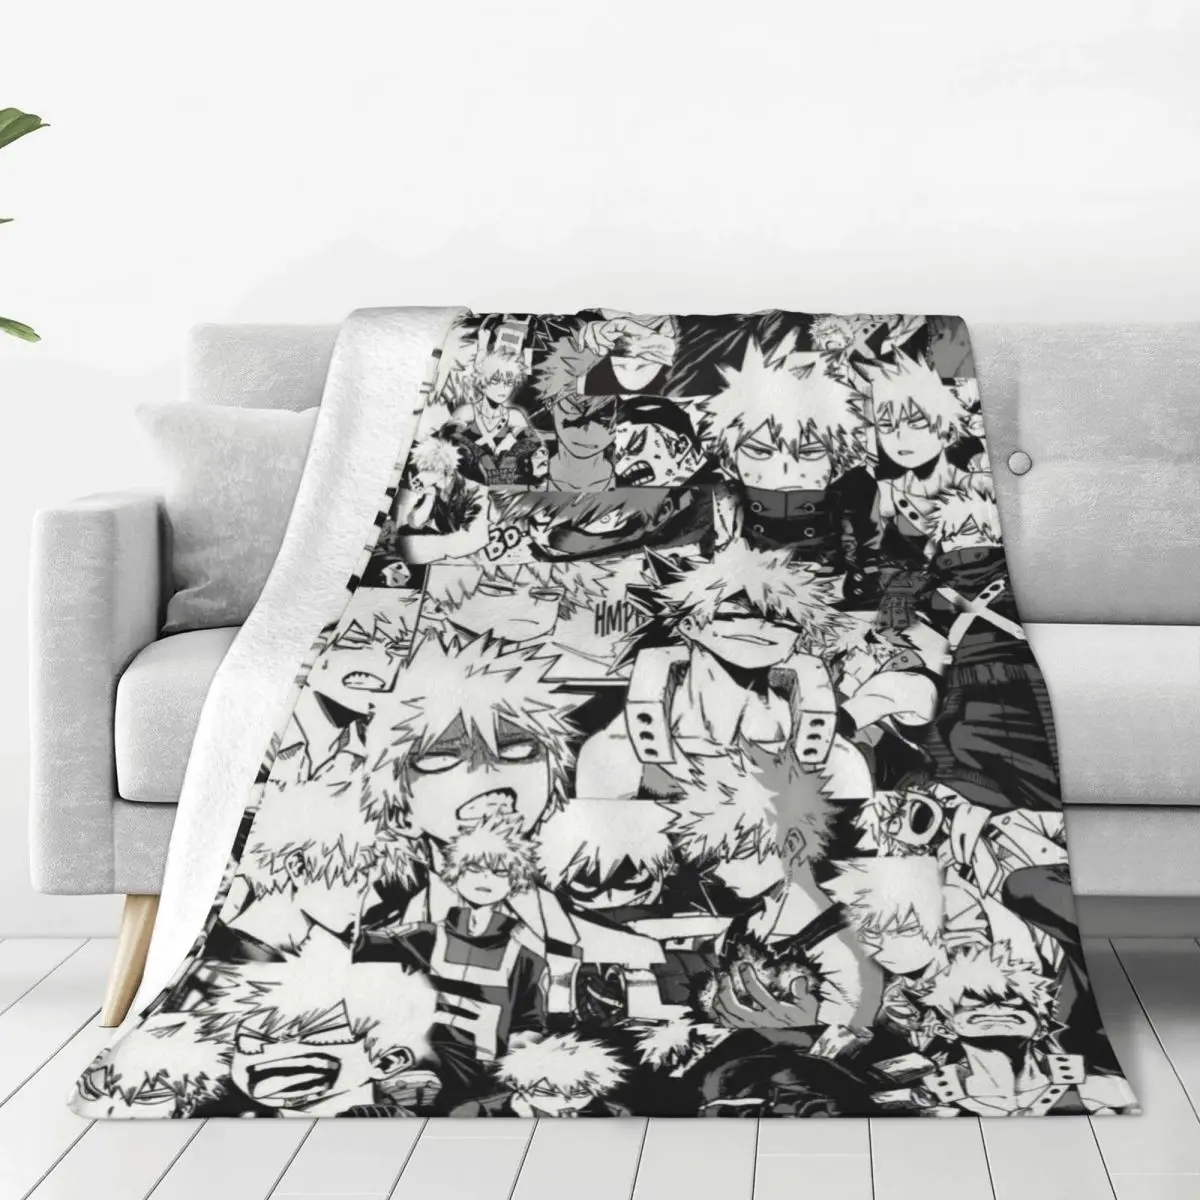 

My Hero Academia Dabi Collage Blanket Super Warm Decorative Bed Throw Blankets for Luxury Bedding Travel Camping Blankets